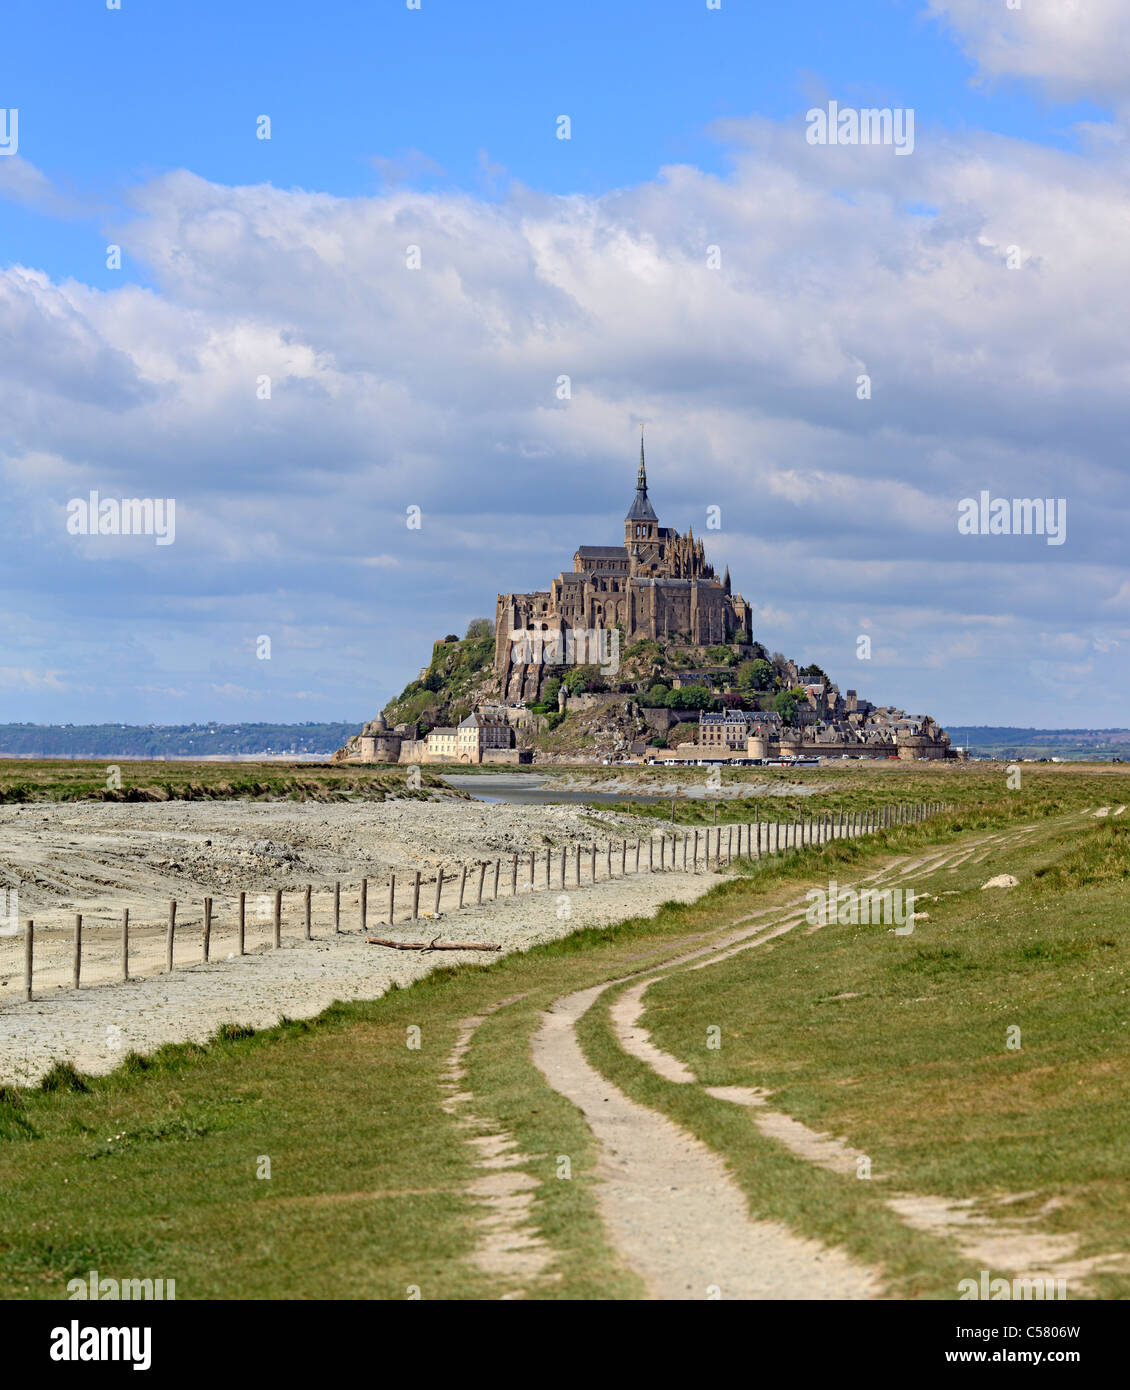 France, French, Europe, European, Western Europe, Architecture, building, City, Mont Saint-Michel, Manche department, Lower Norm Stock Photo